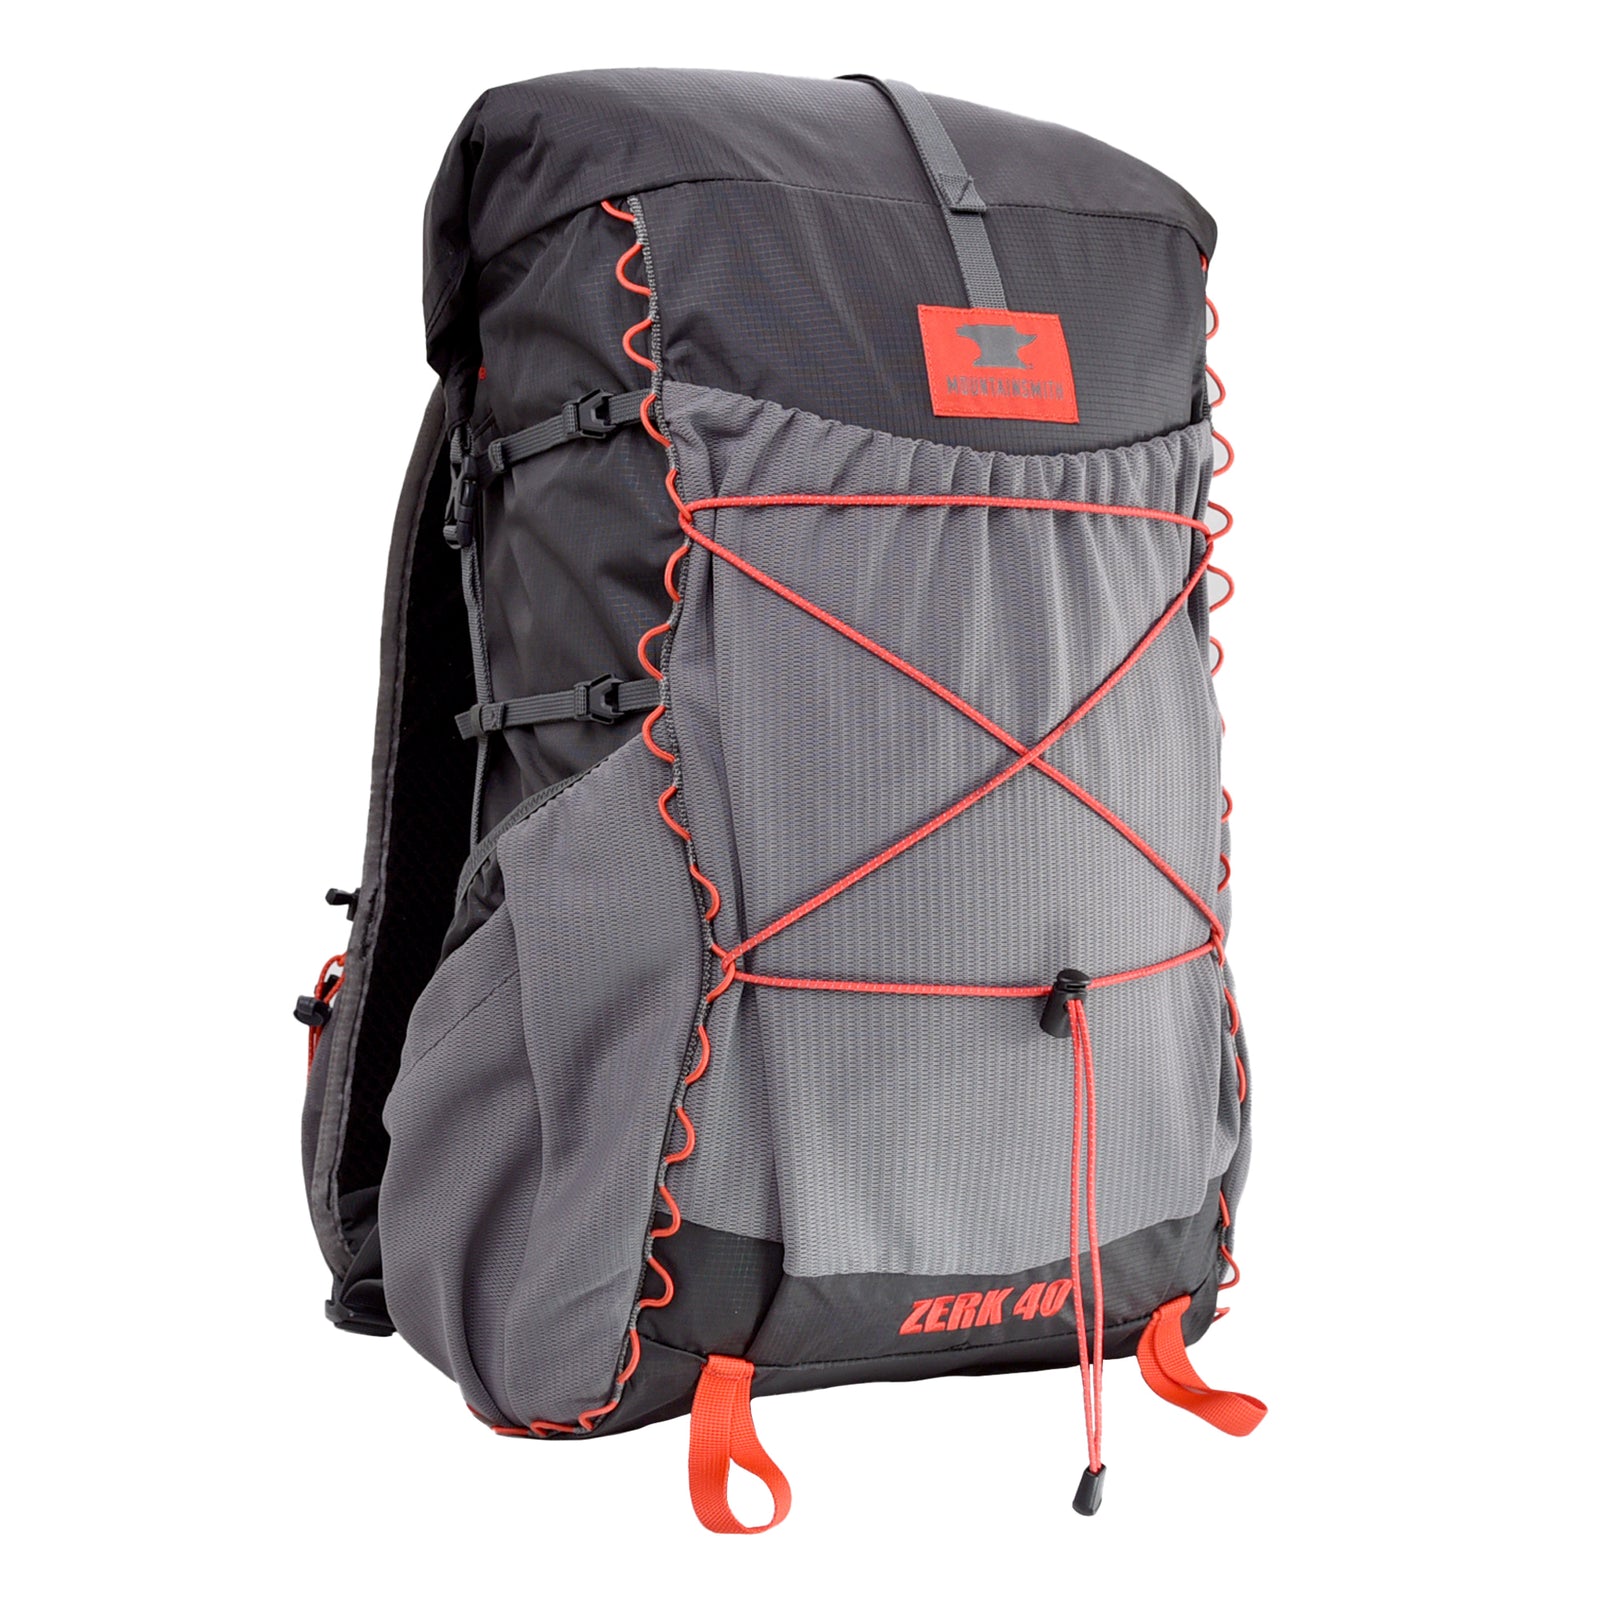 Mountainsmith | Shop Backpacks for School or Outdoors